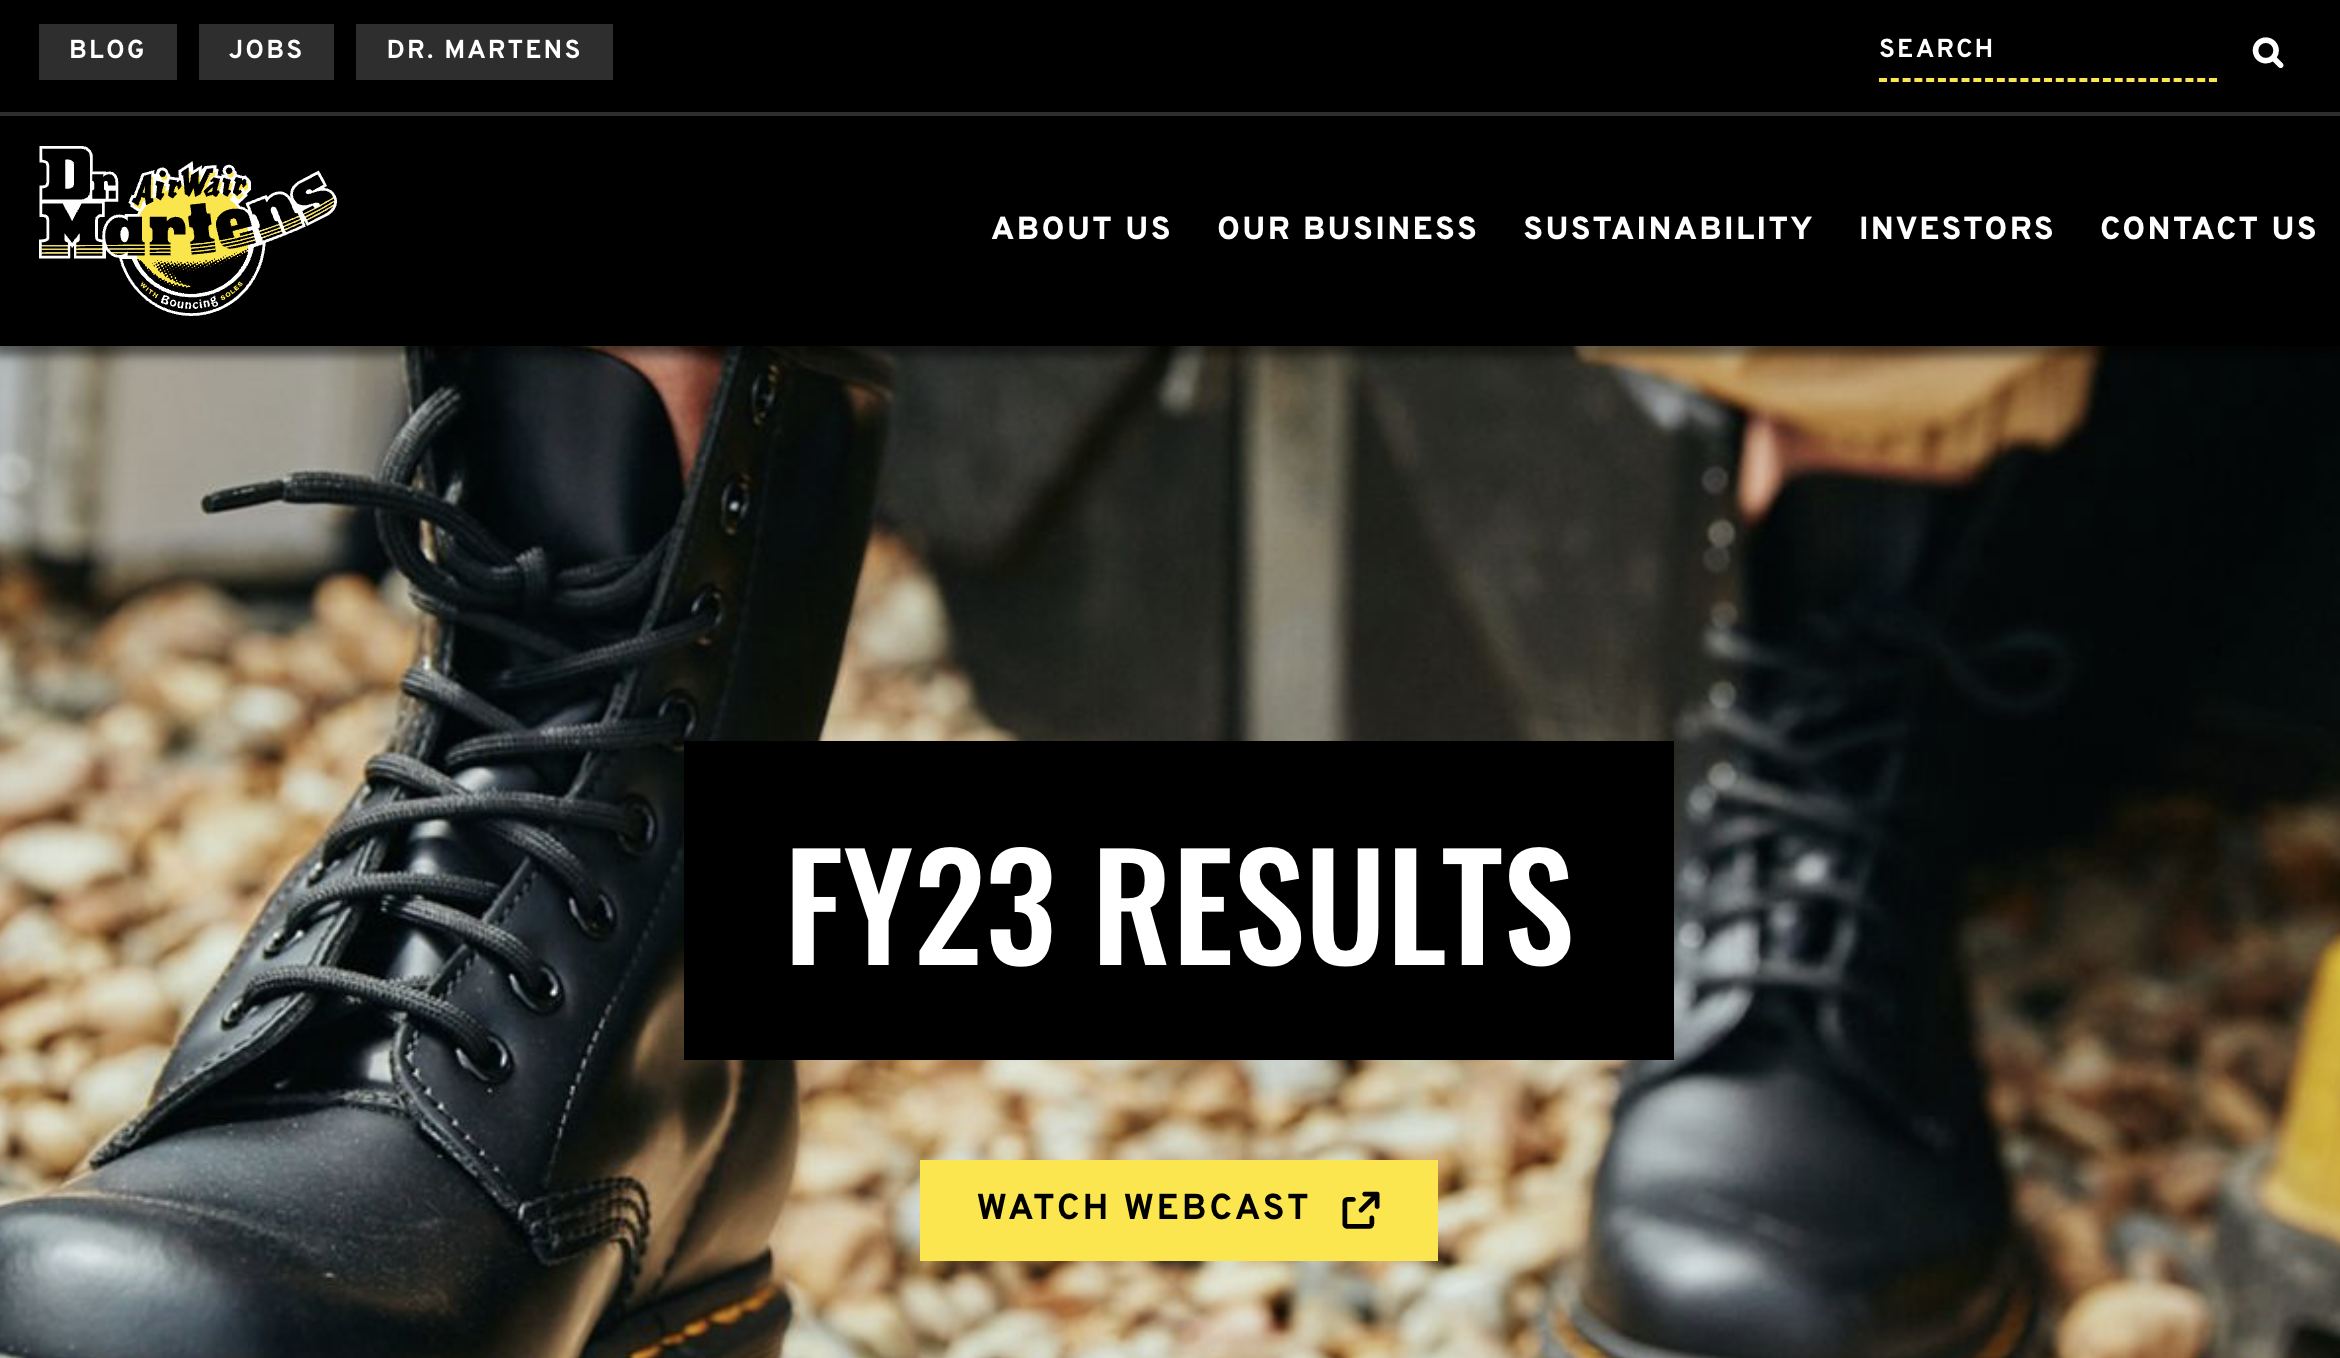 Dr. Martens FY2023 Revenue Breaks the £1 Billion Mark for the First Time, Planning to Make up for Mistakes in US